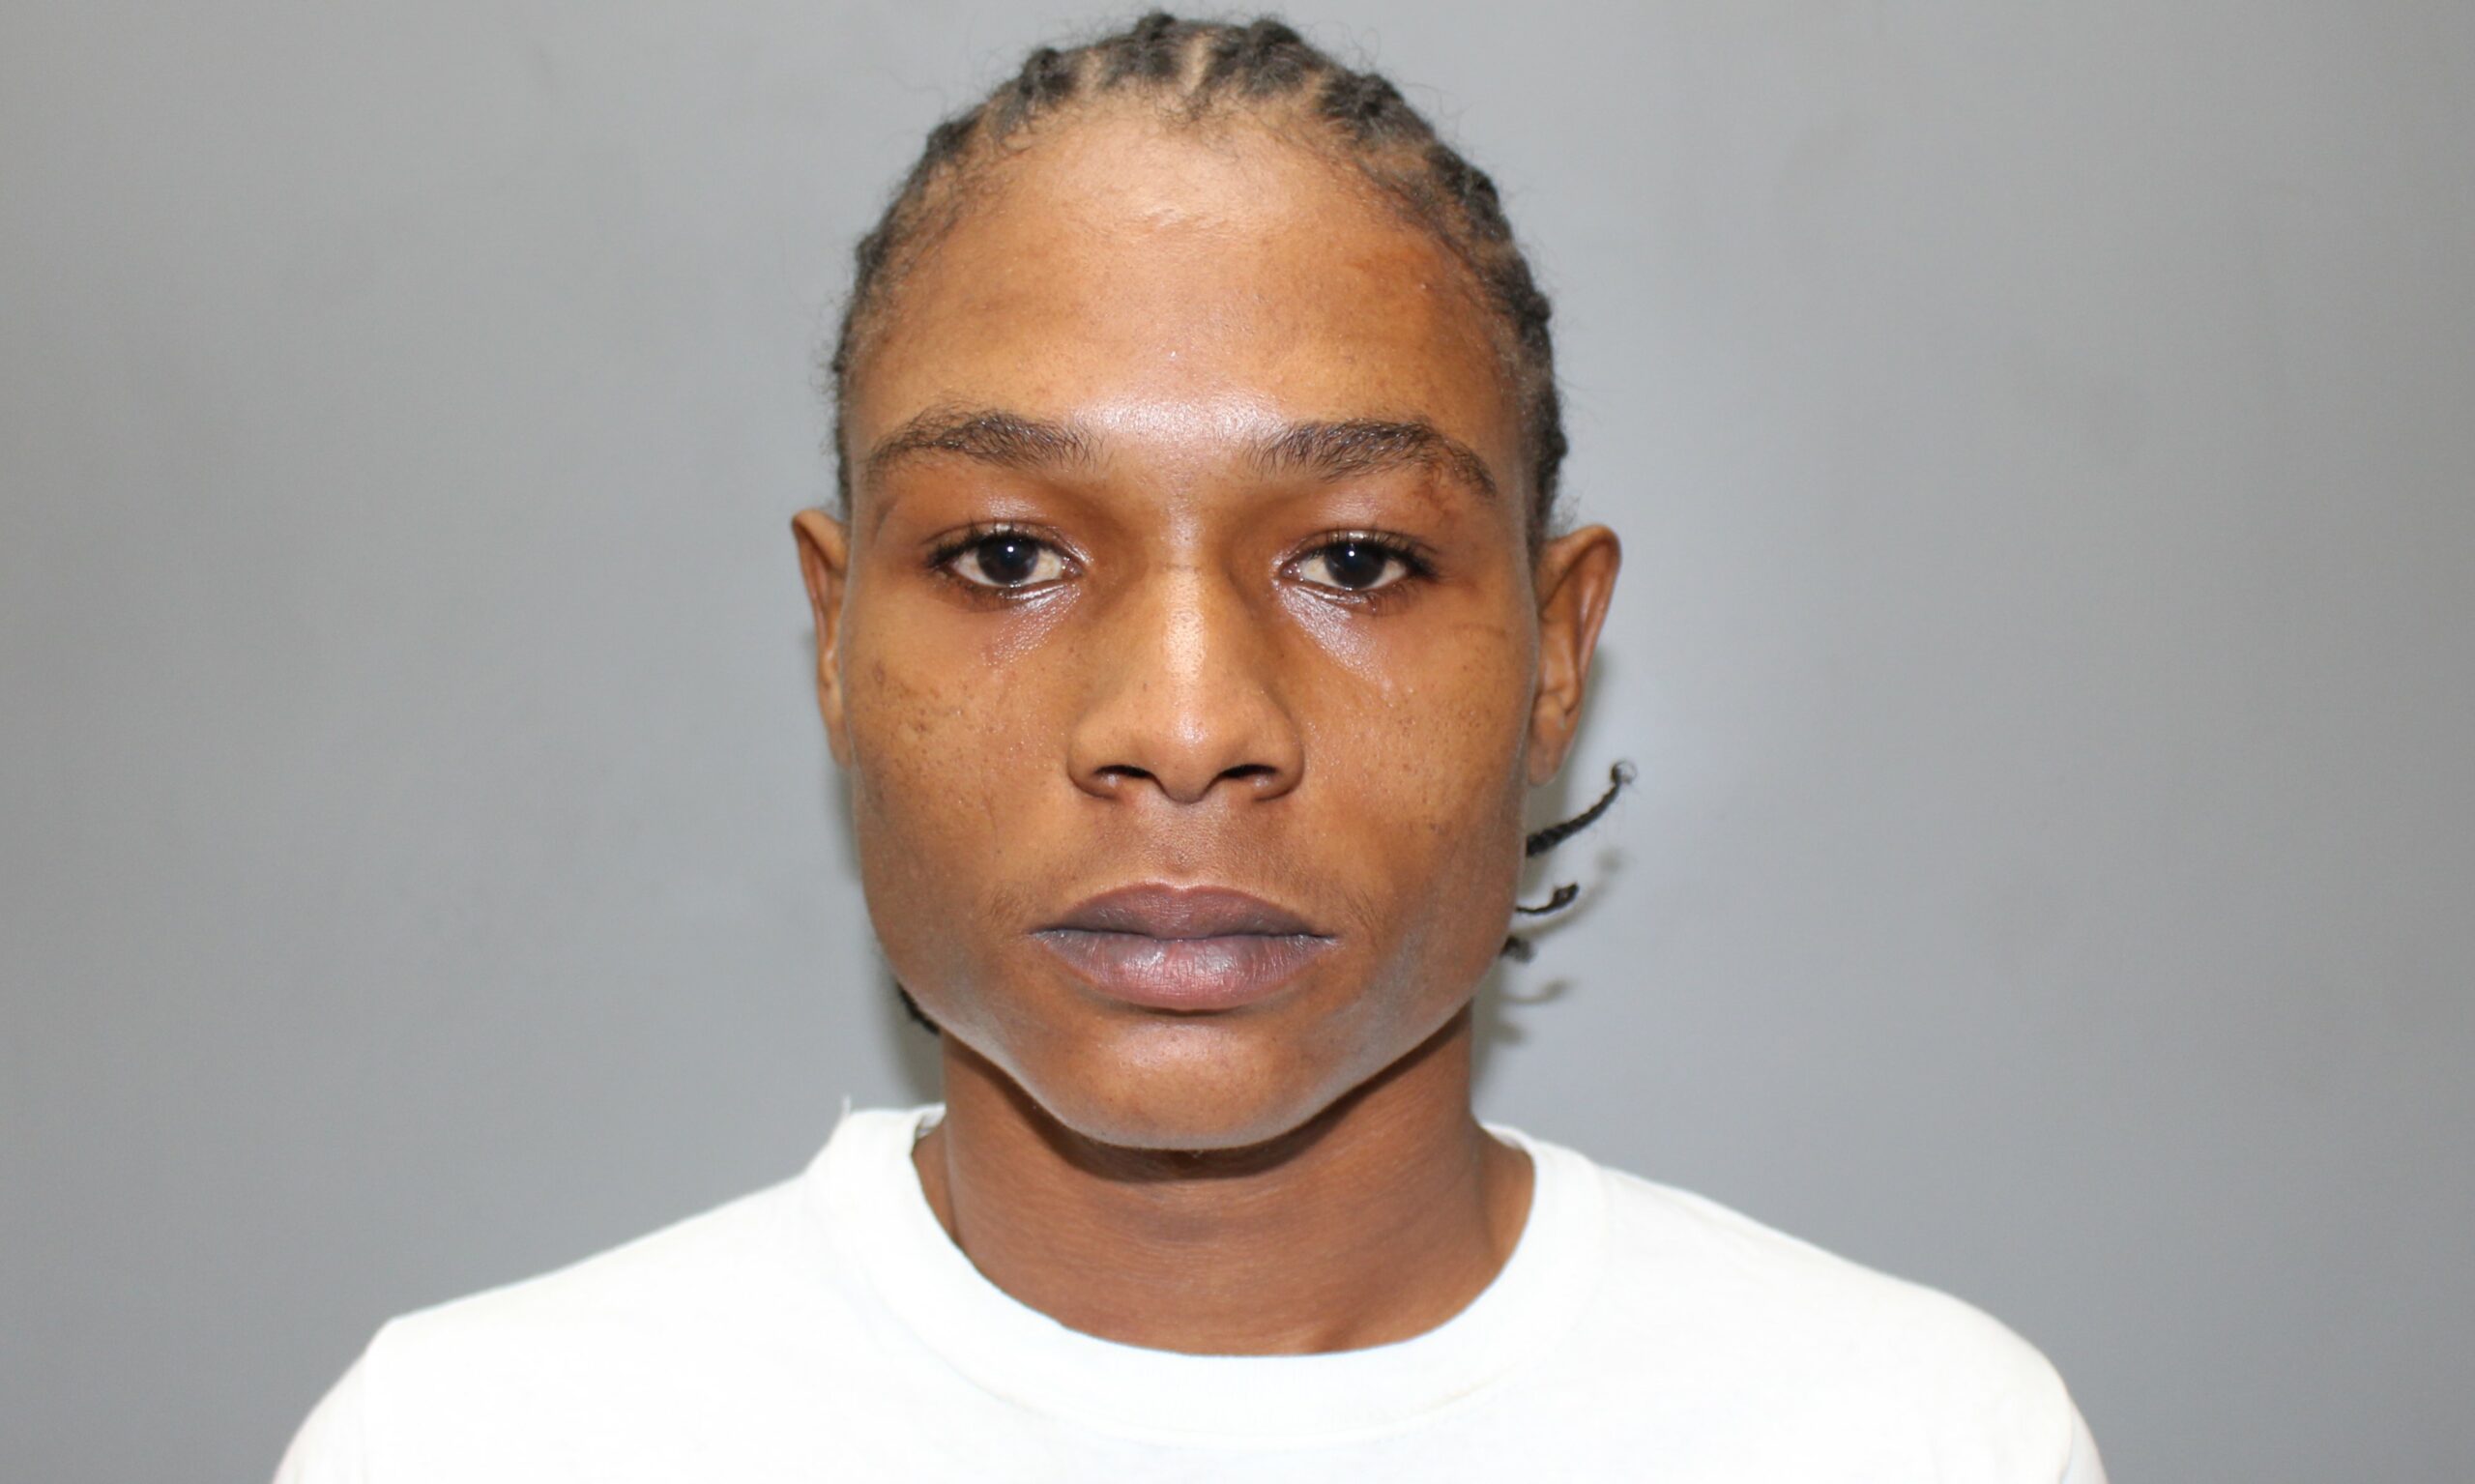 Shekil Berthier, 19, Turns Himself In To The VIPD Without Incident on STT